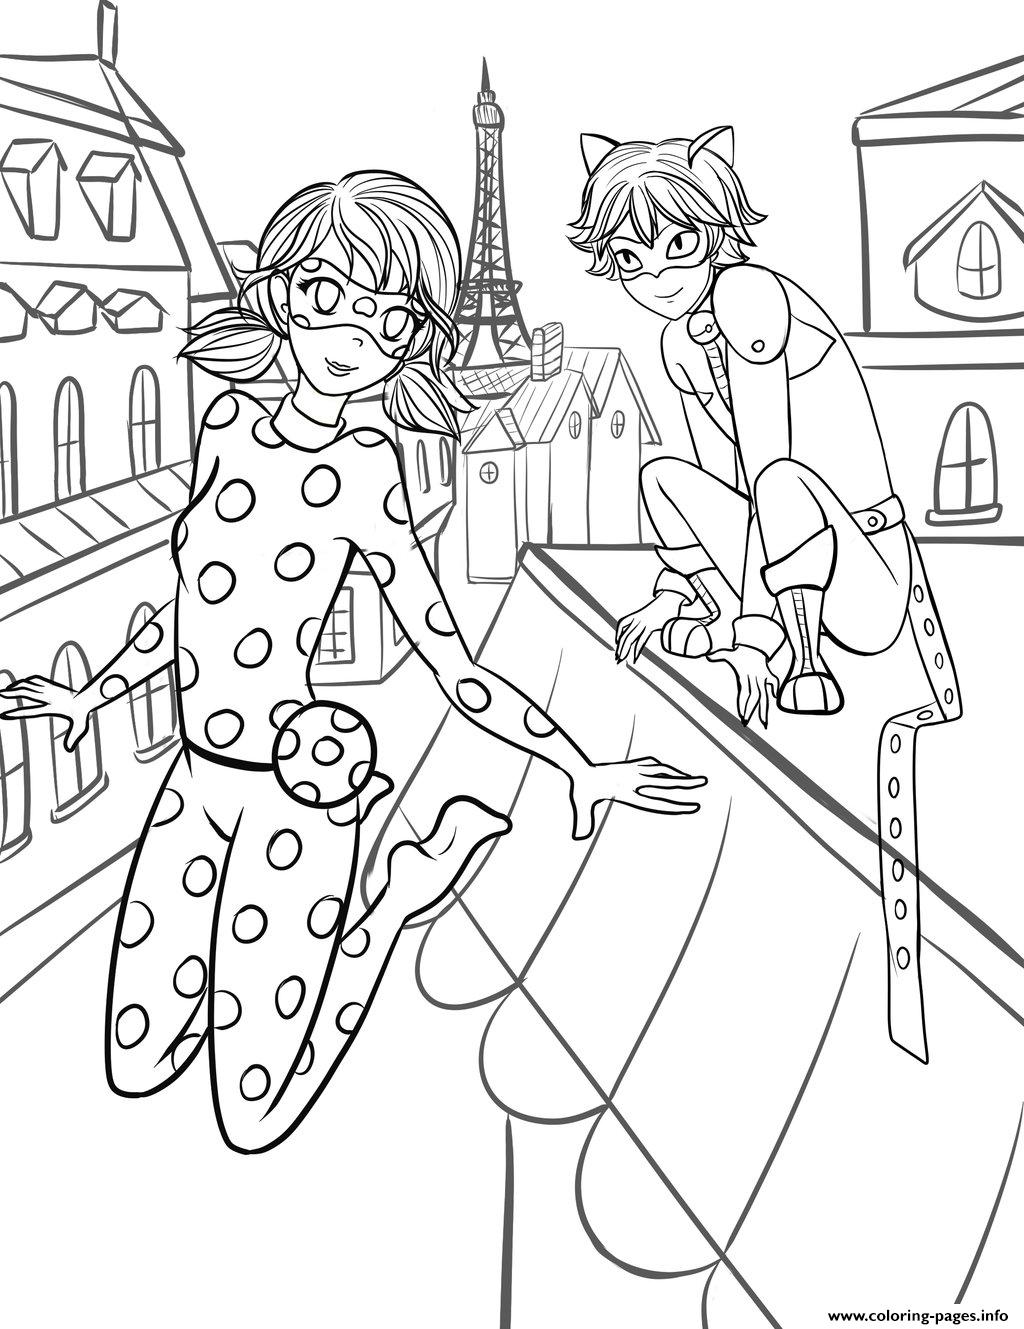 Download Miraculous Ladybug By Stella1999 Coloring Pages Printable